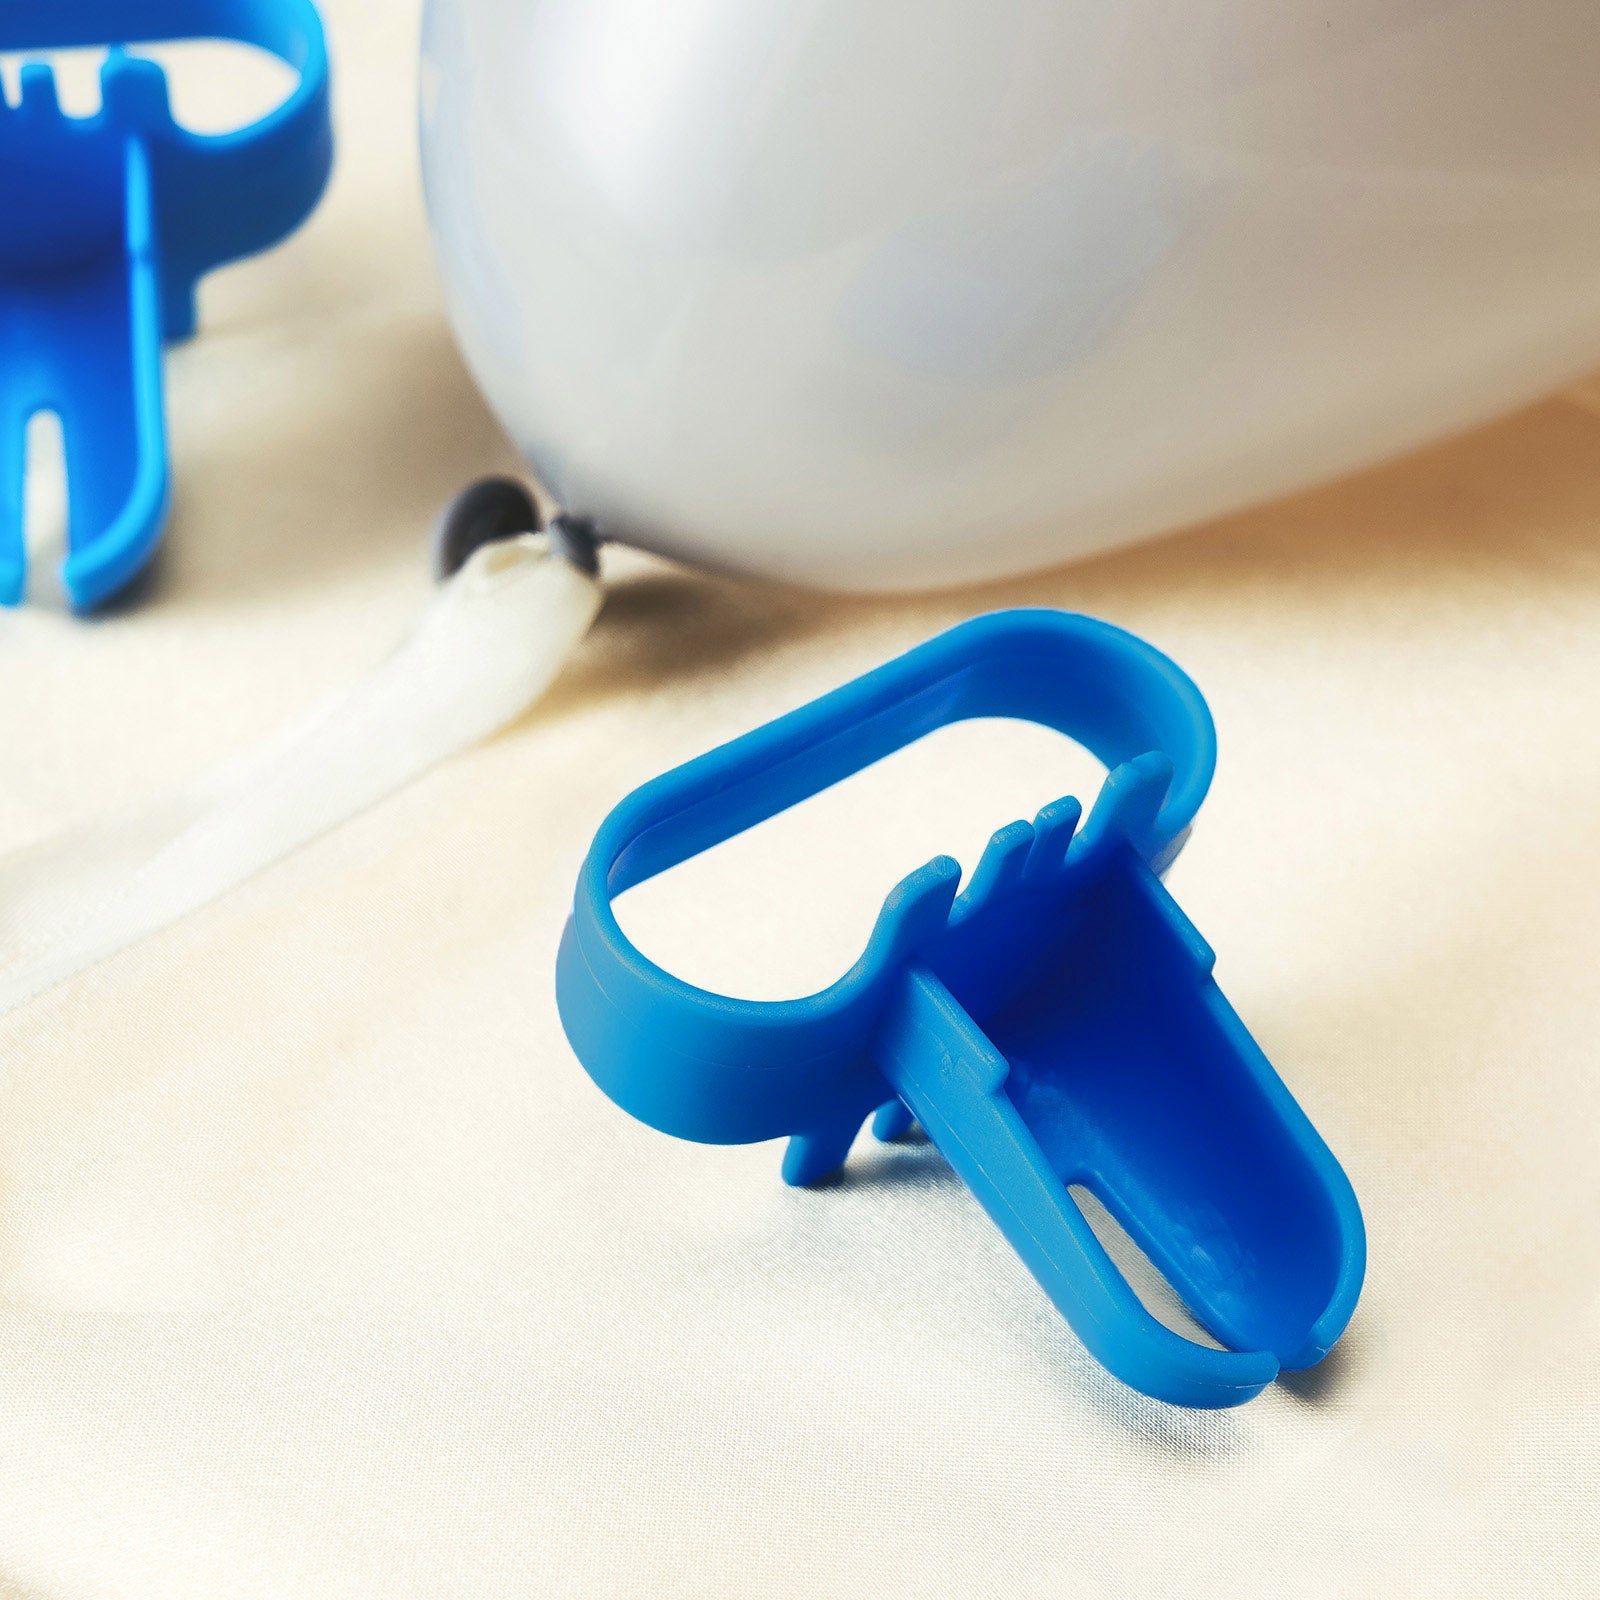 How To Use Balloon Tying Tool 